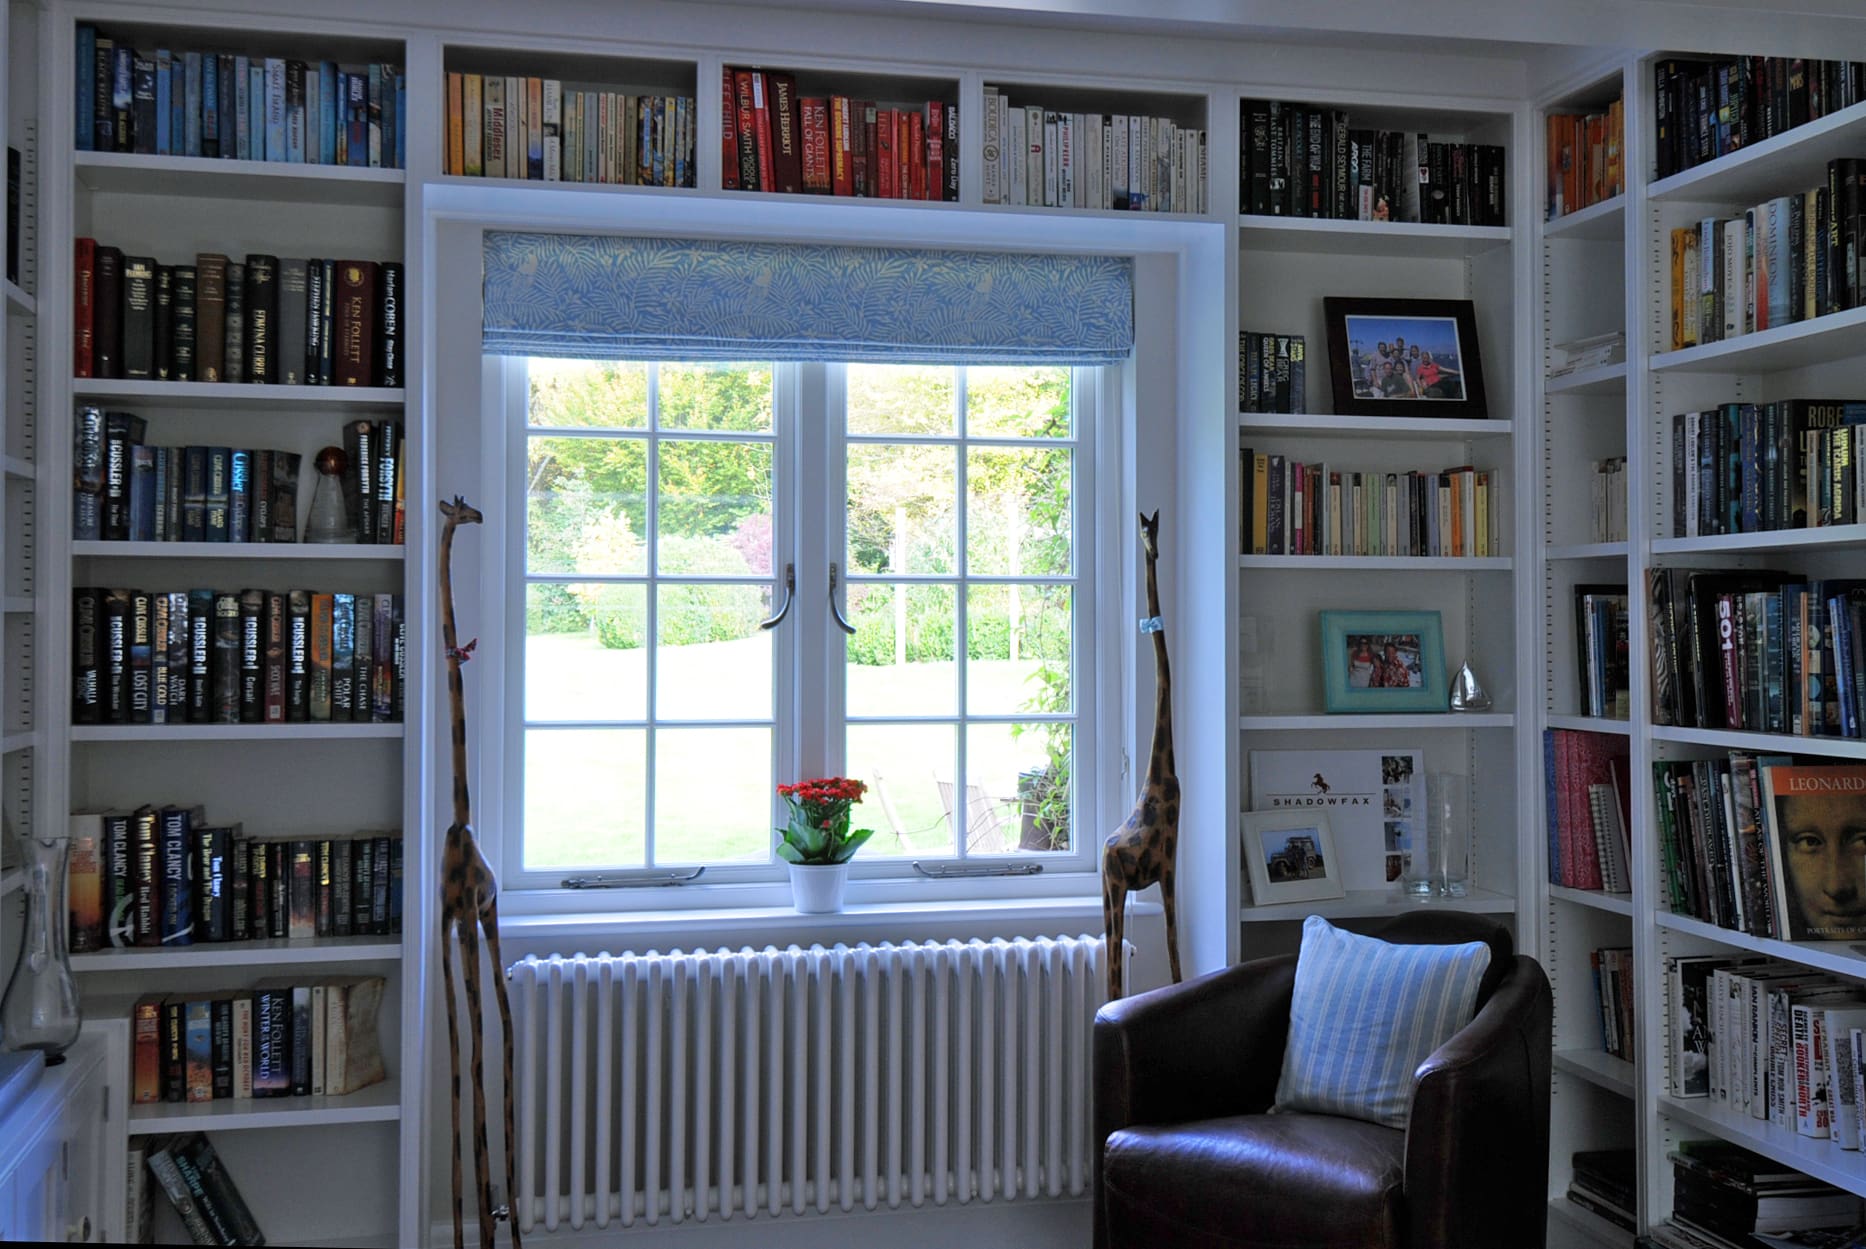 Traditional home interior with bookcases surrounding a traditional window.